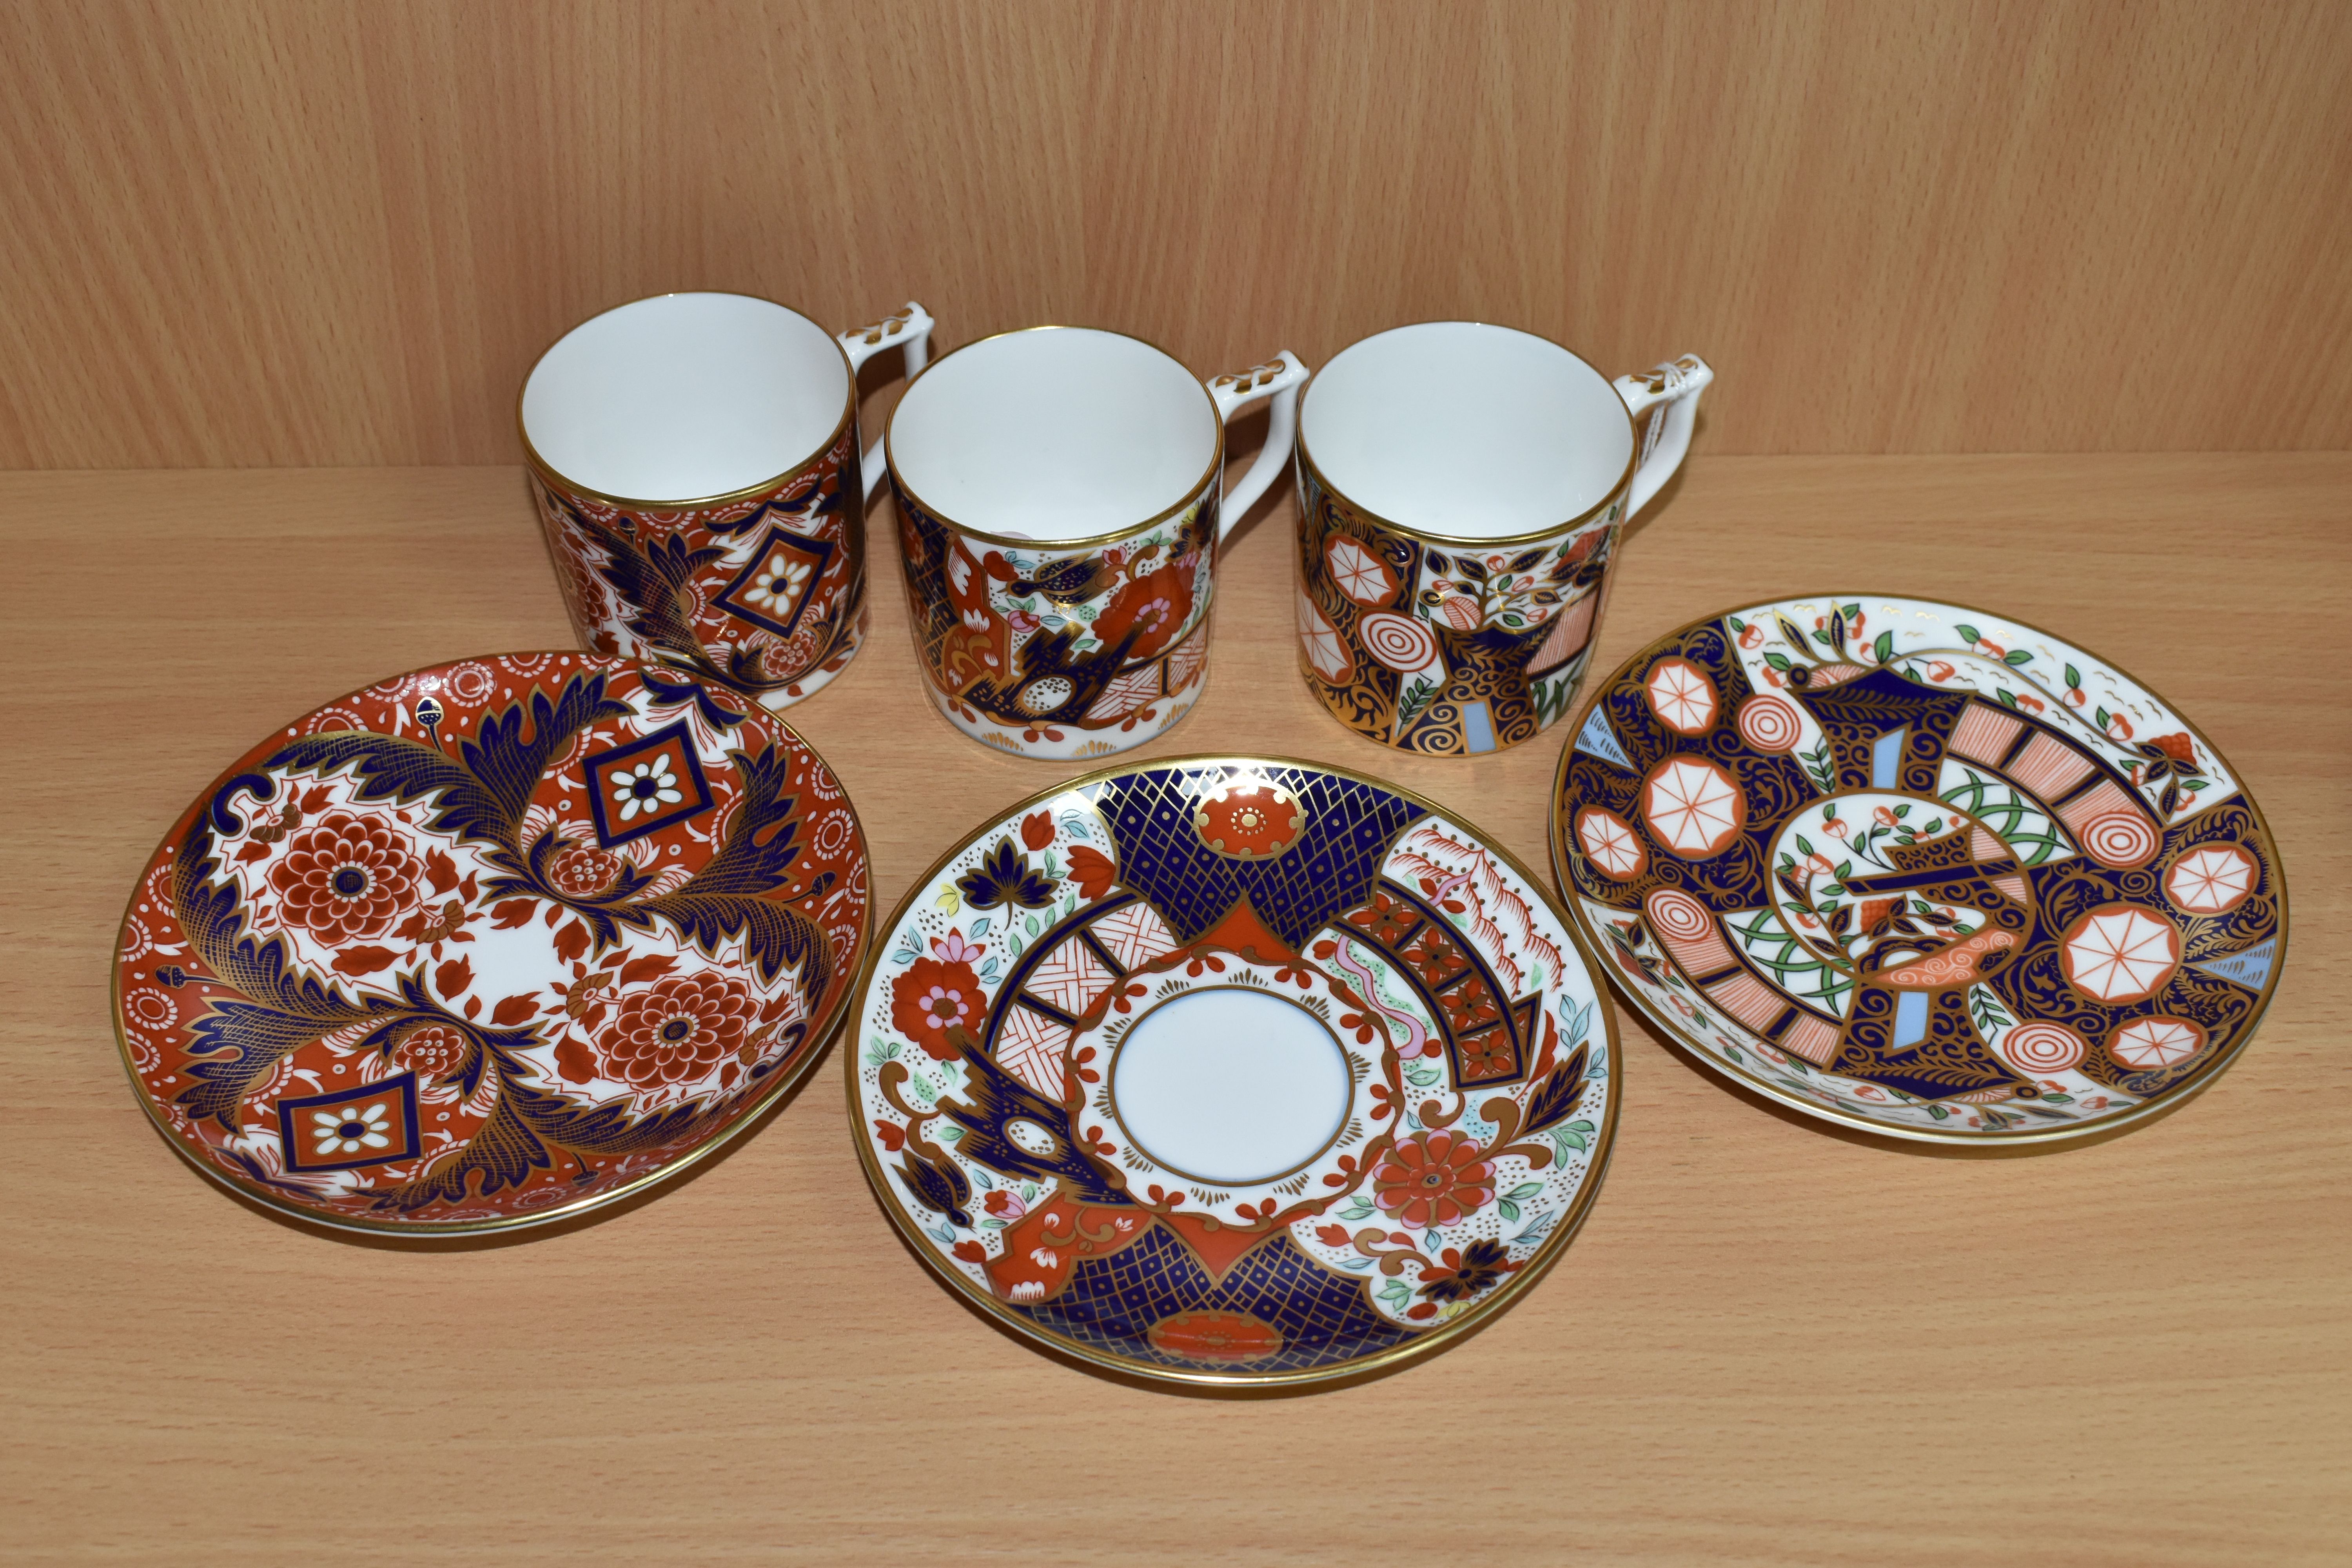 THREE ROYAL CROWN DERBY COFFEE CANS AND SAUCERS, from 'The Curator's Collection' in Rich Japan, - Image 3 of 5